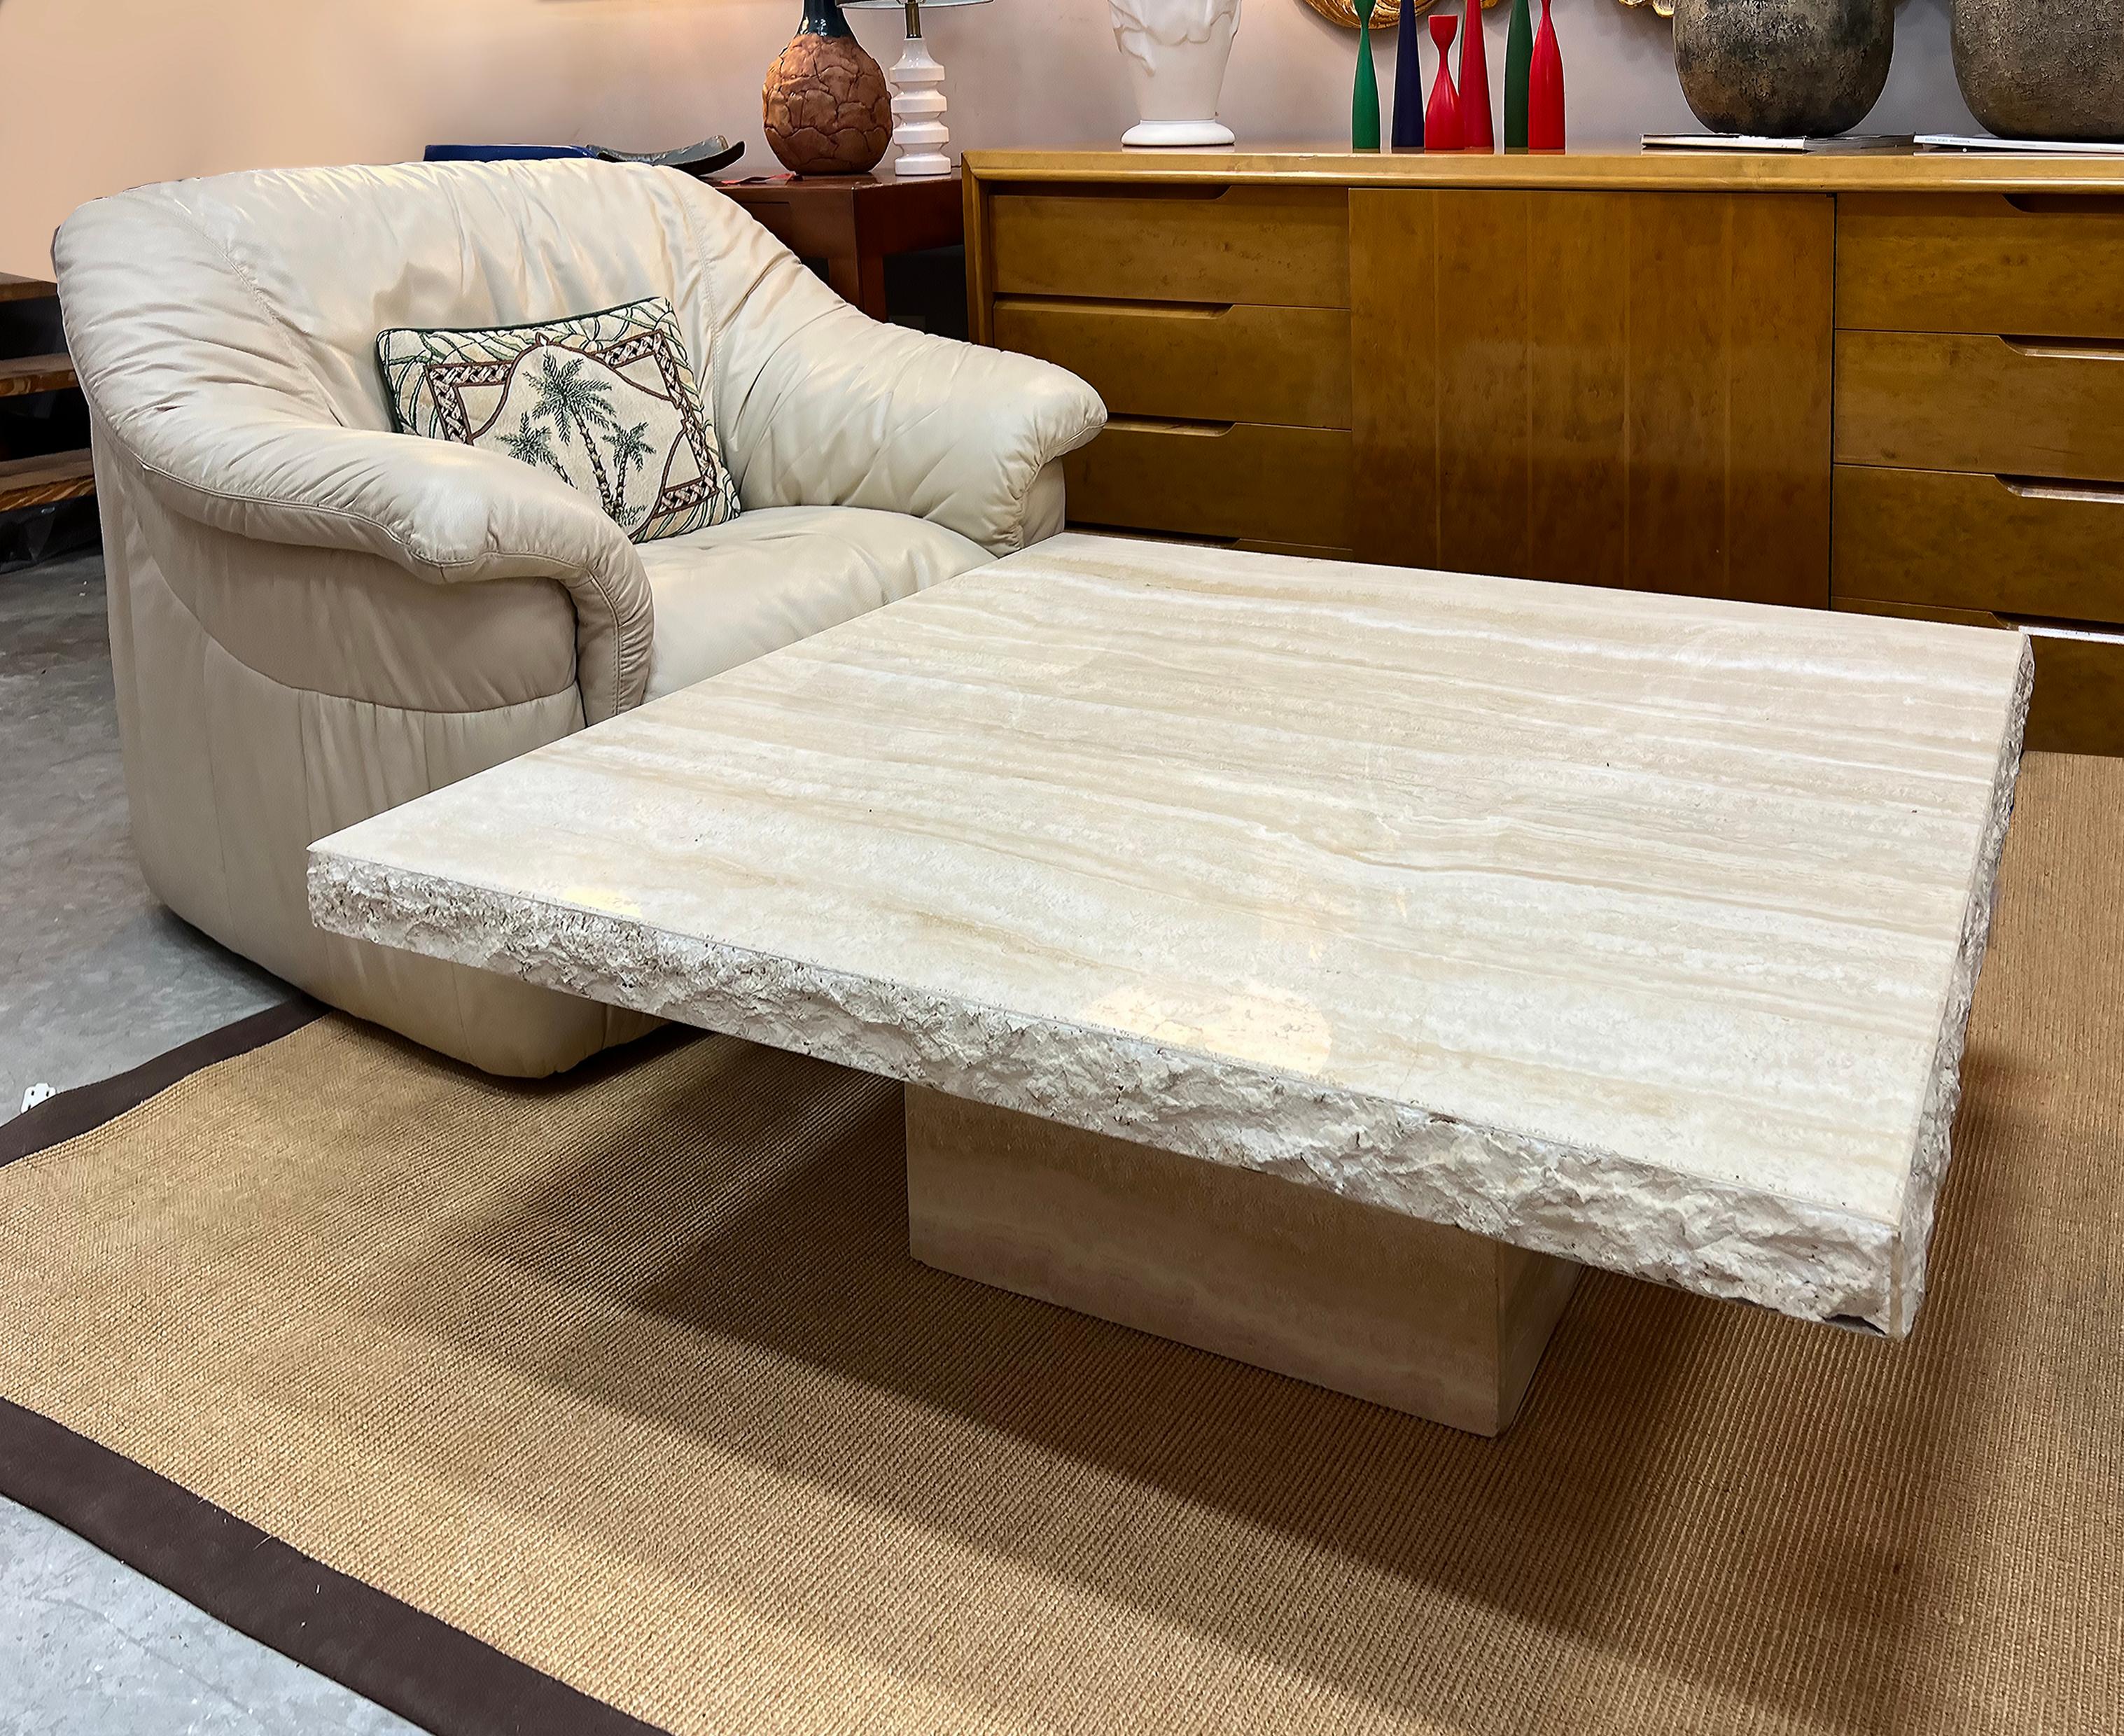 Vintage Postmodern Live Edge Travertine Stone Coffee Table  

Offered for sale is a substantial square circa 1980s Italian travertine coffee table with live-edge finished ends. The thick travertine stone top is beautifully grained and separates from